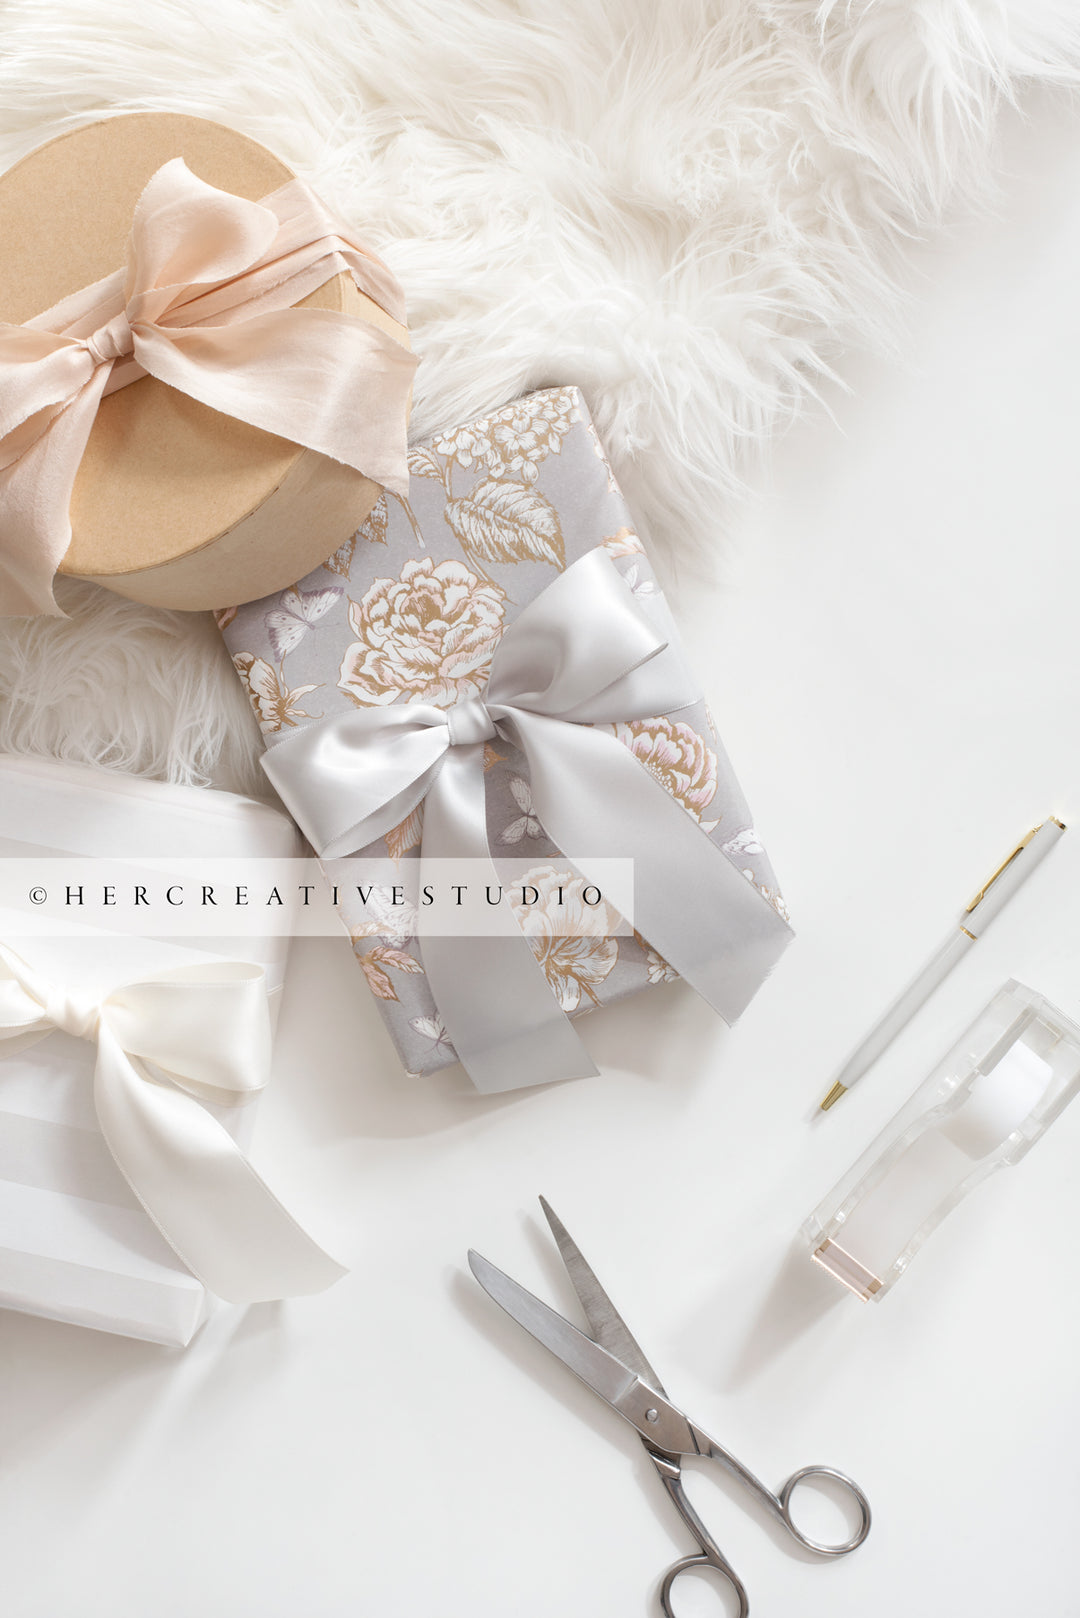 Gifts with Ribbon & Scissors on White Background, Stock Image